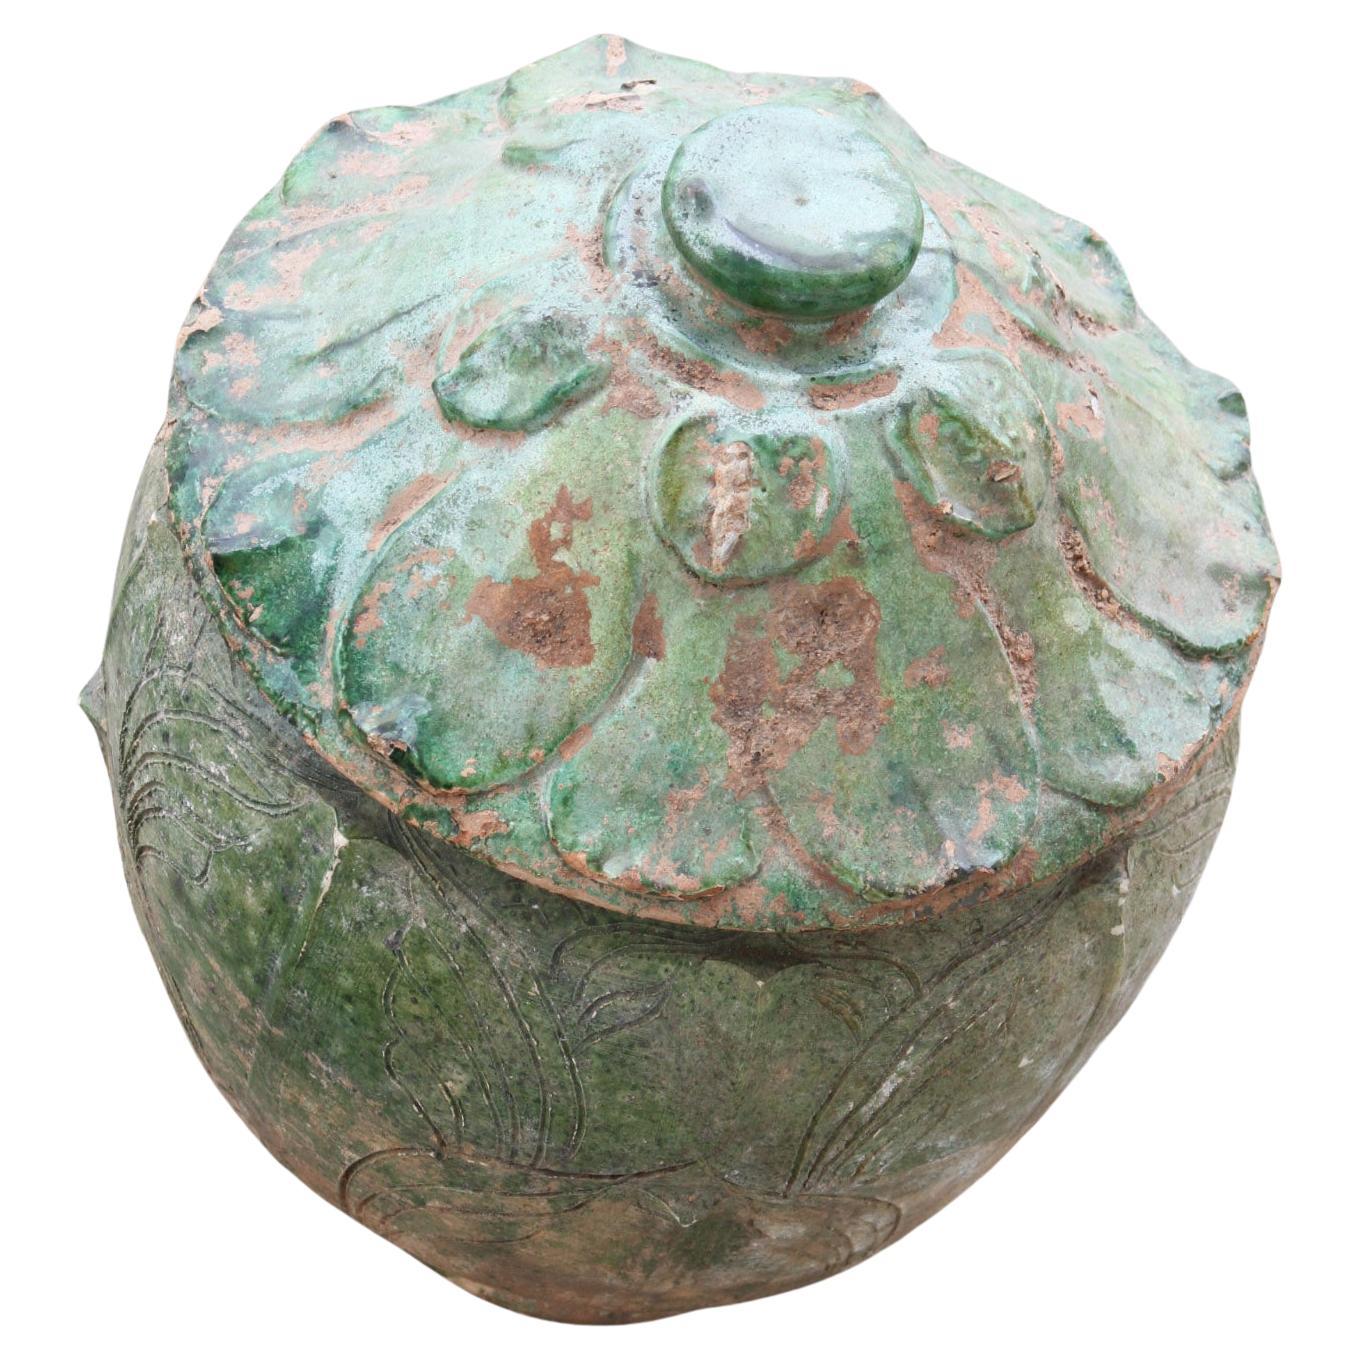 Chinese offering Pot from the Yuan Dynasty

Probably used to contain ritual offerings, this jar may have come from a Buddhist temple or shrine. Decorated with circular geometrical shapes & lotus design this offering jar is adorned with a green glaze